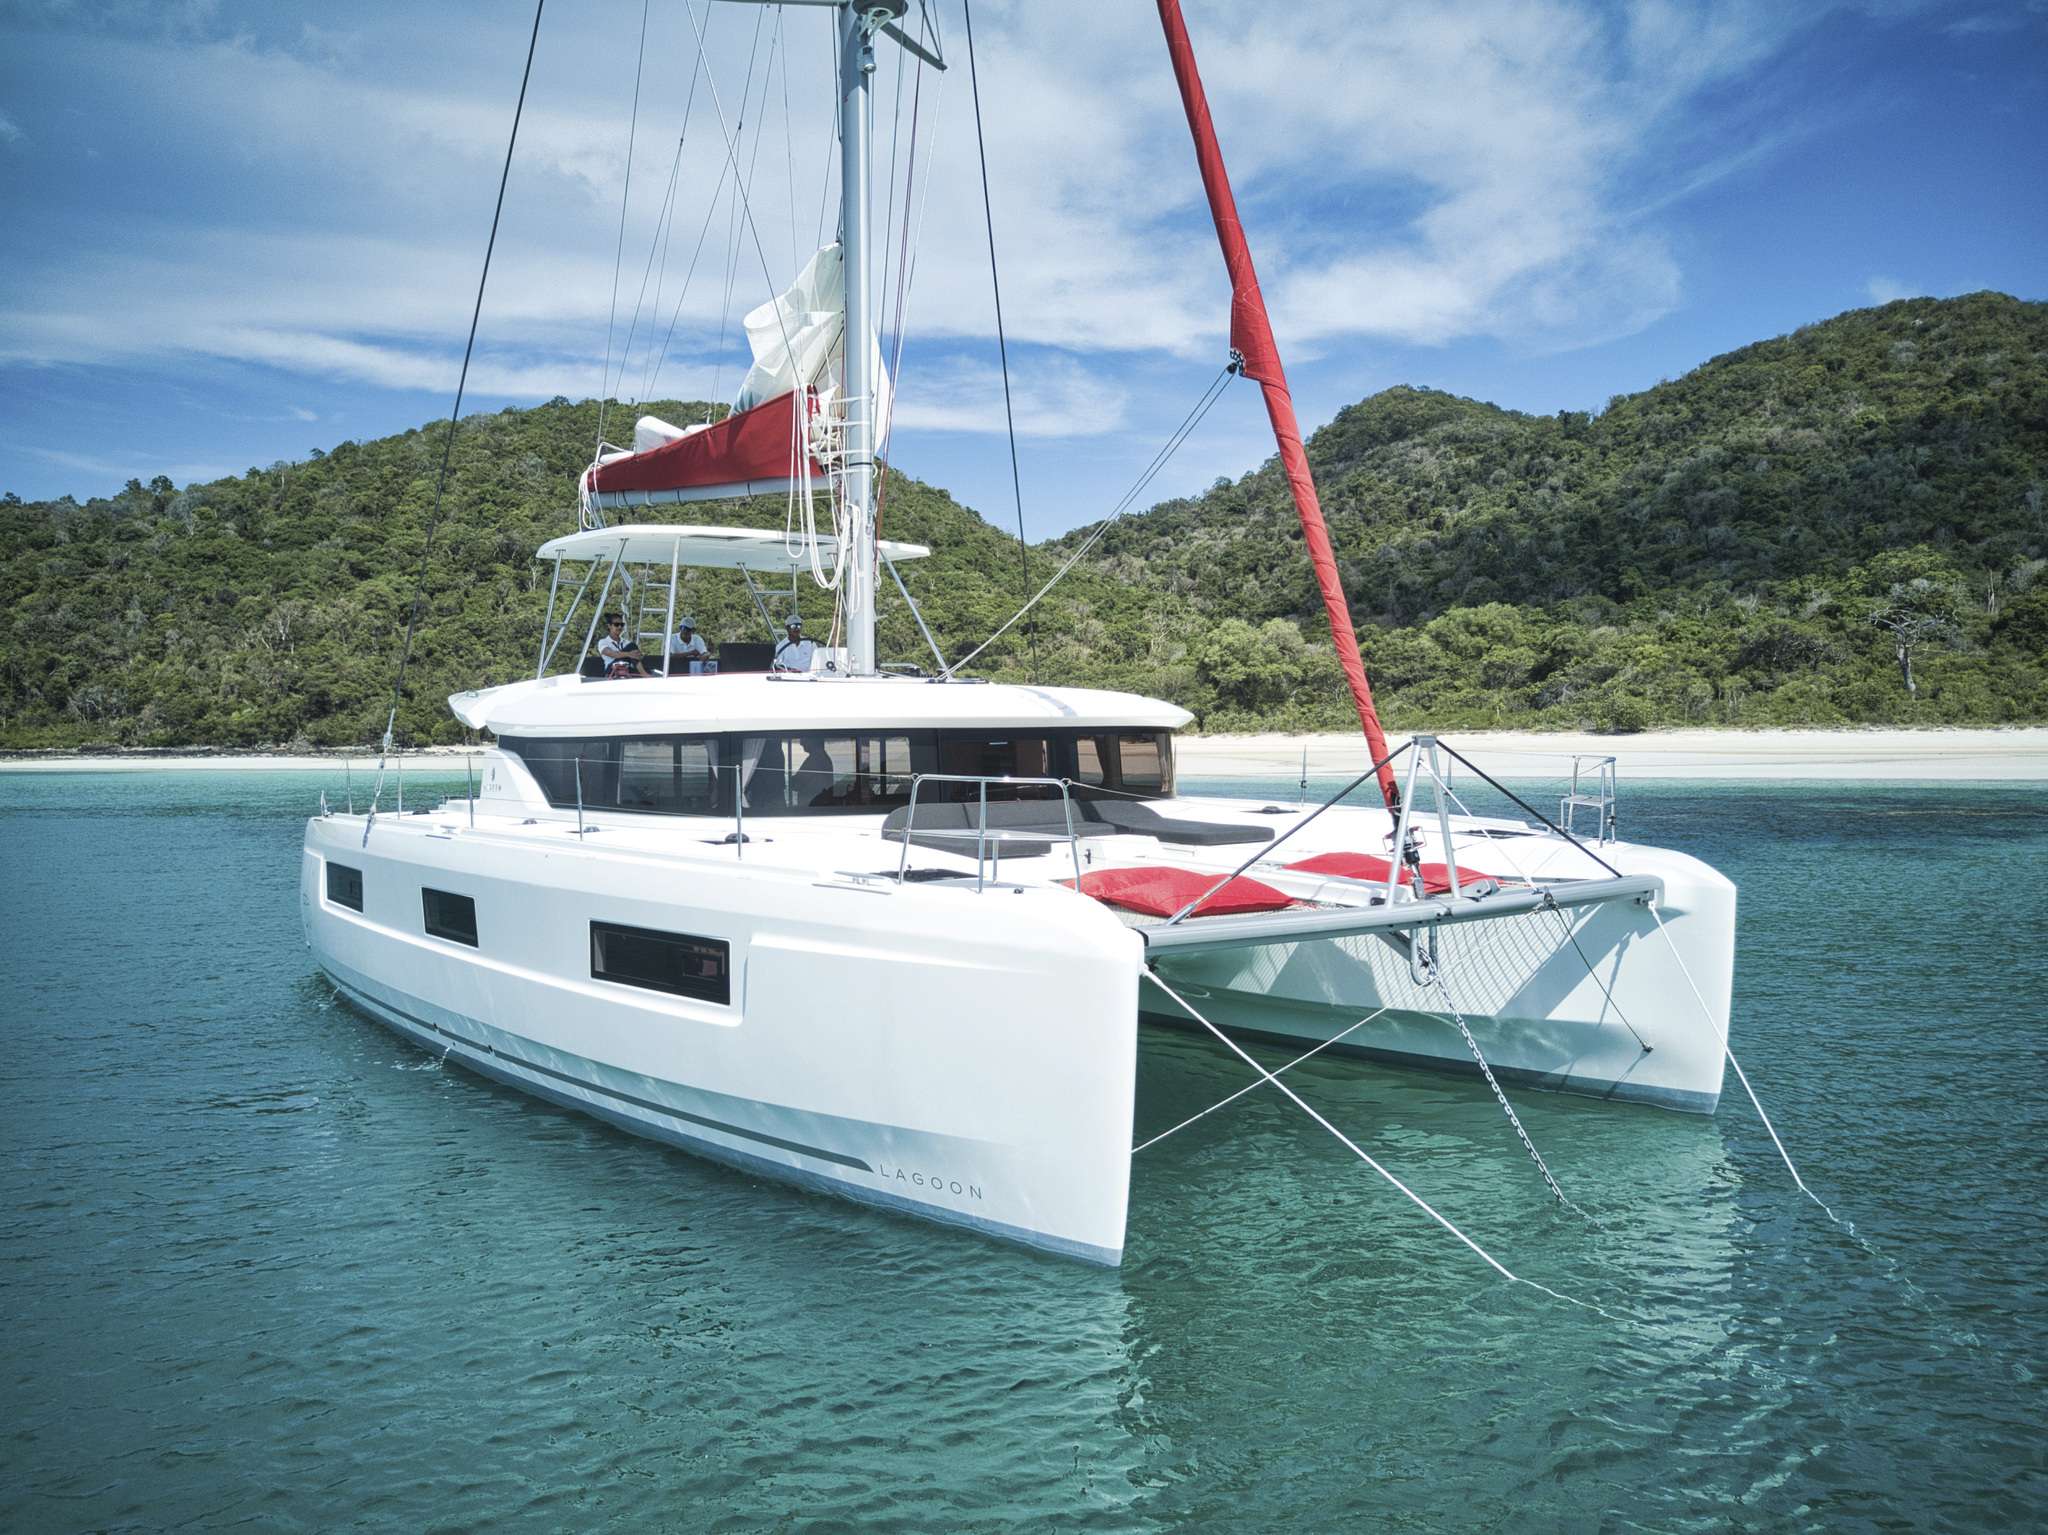 Maverick - Yacht Charter Philippines & Boat hire in SE Asia 1